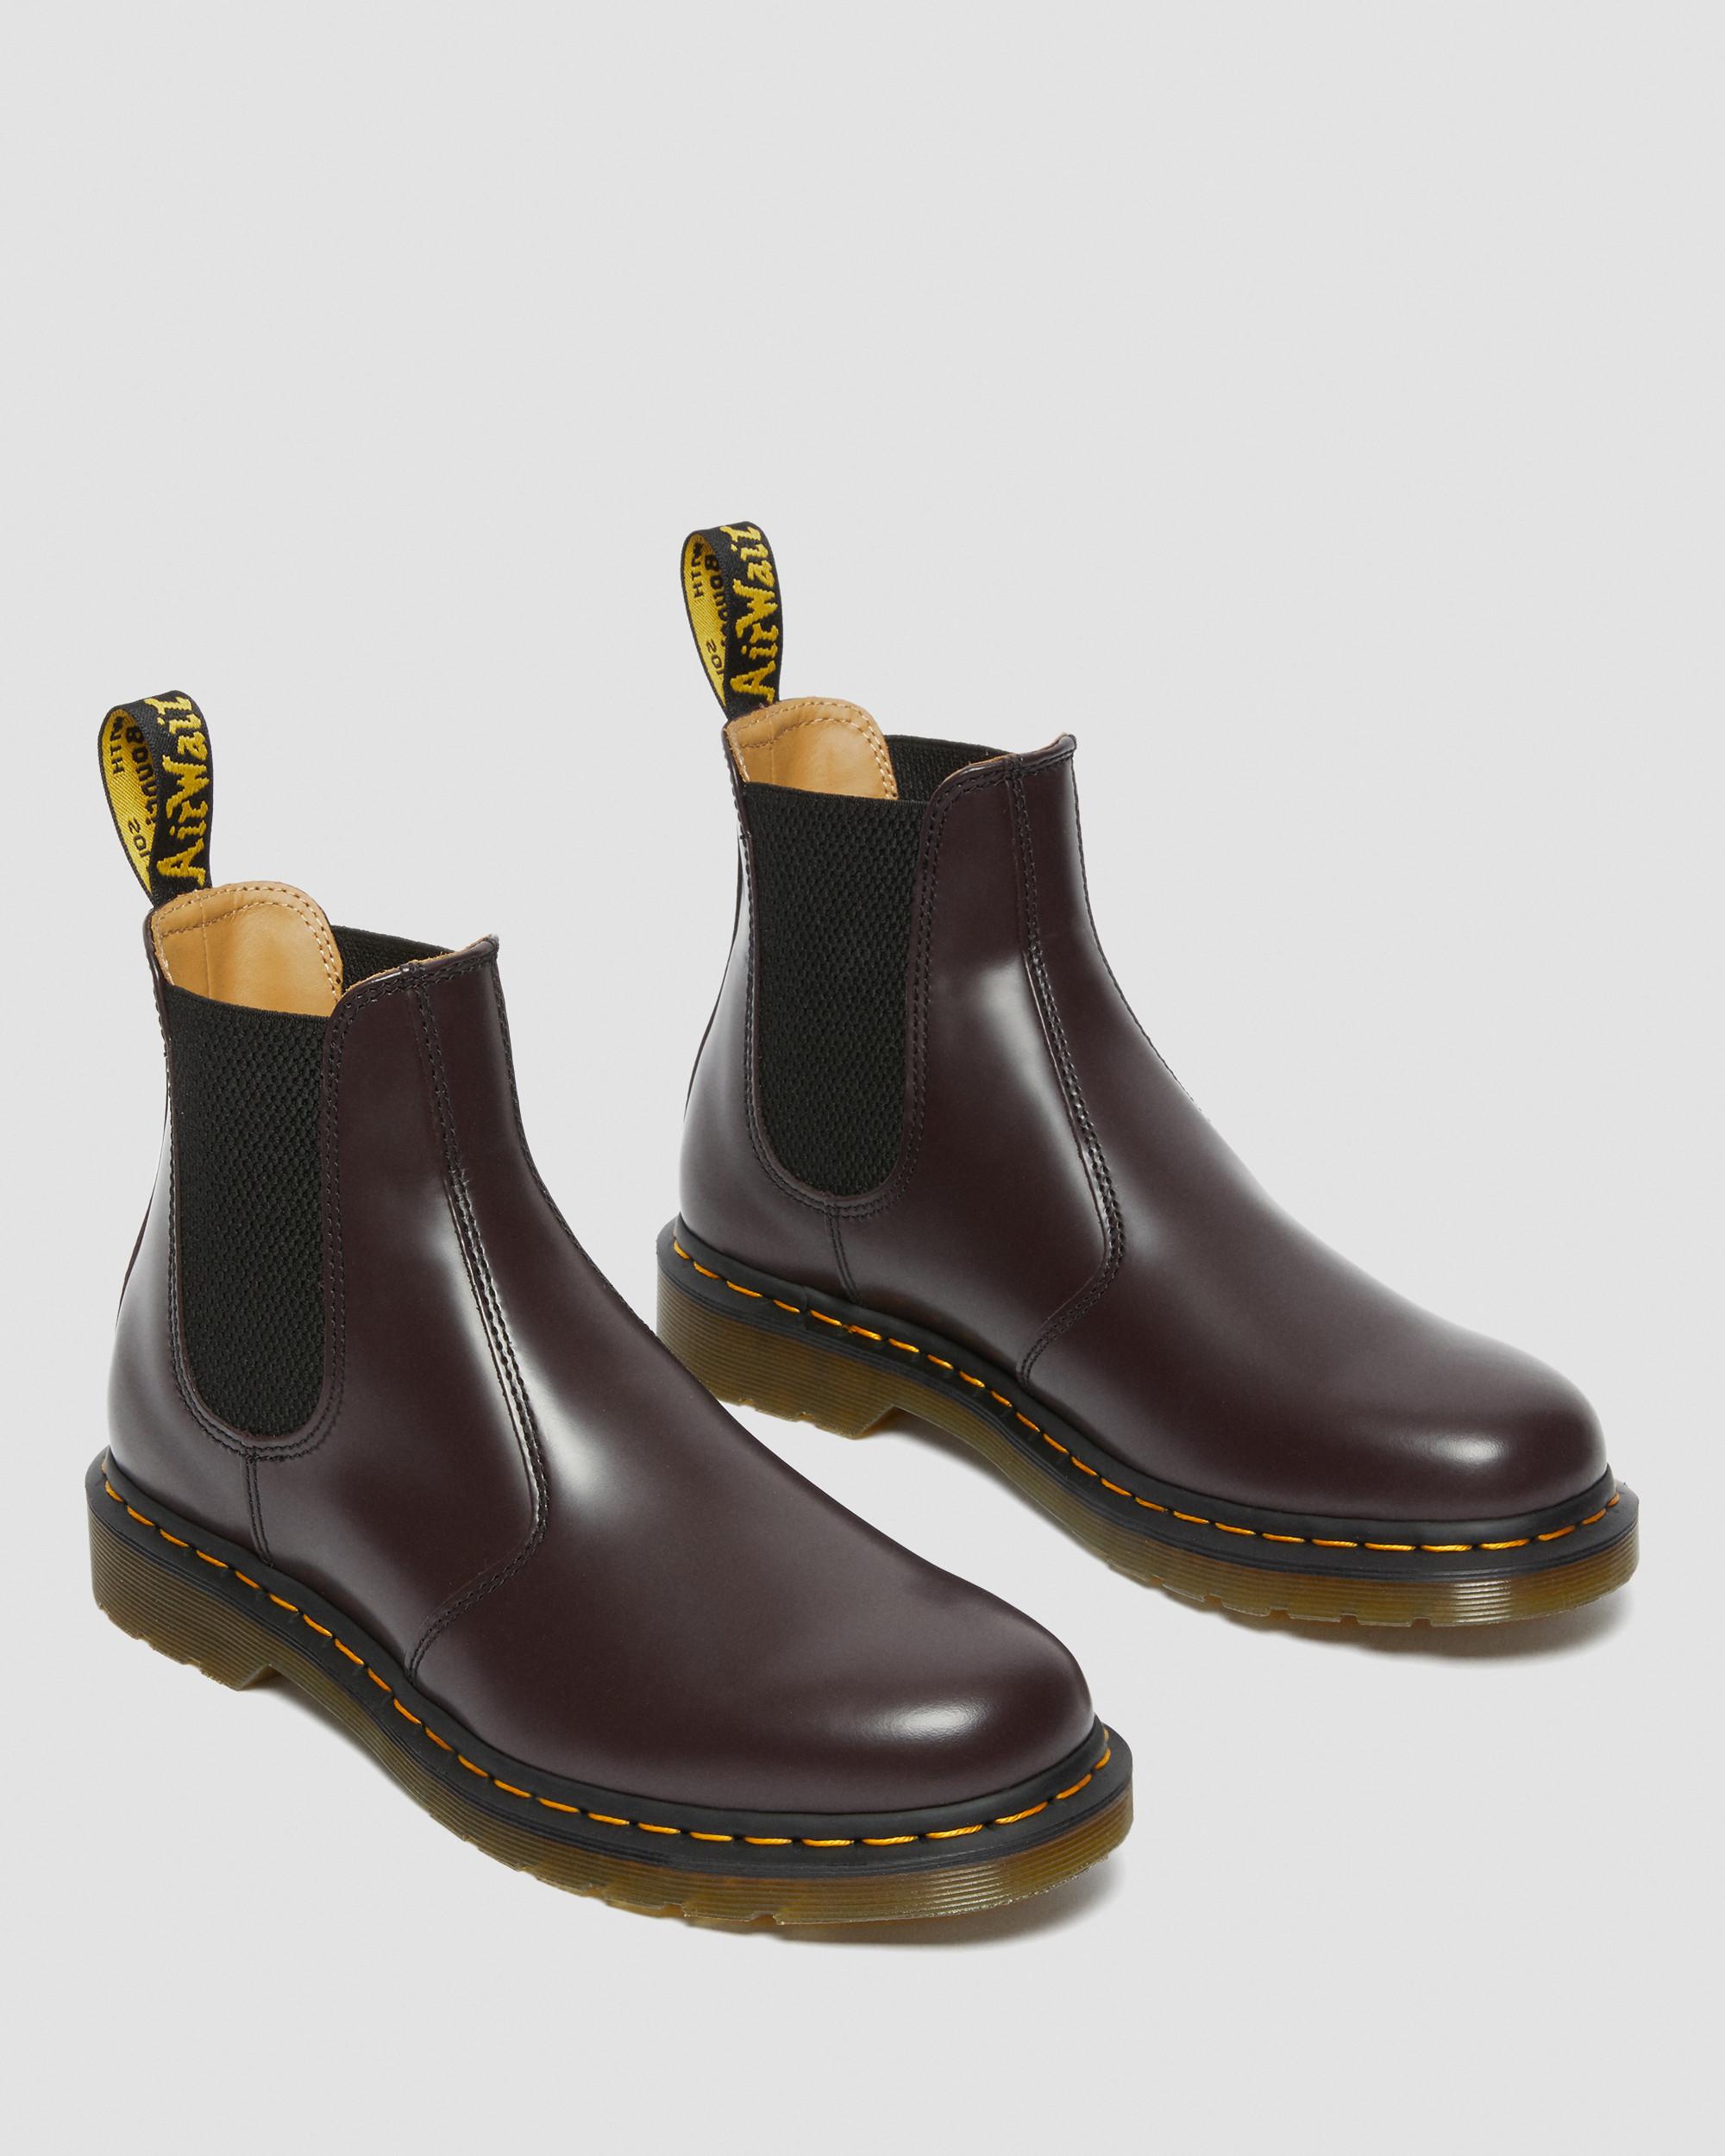 Ruwe olie deed het Vorige 2976 Yellow Stitch Smooth Leather Chelsea Boots | Dr. Martens